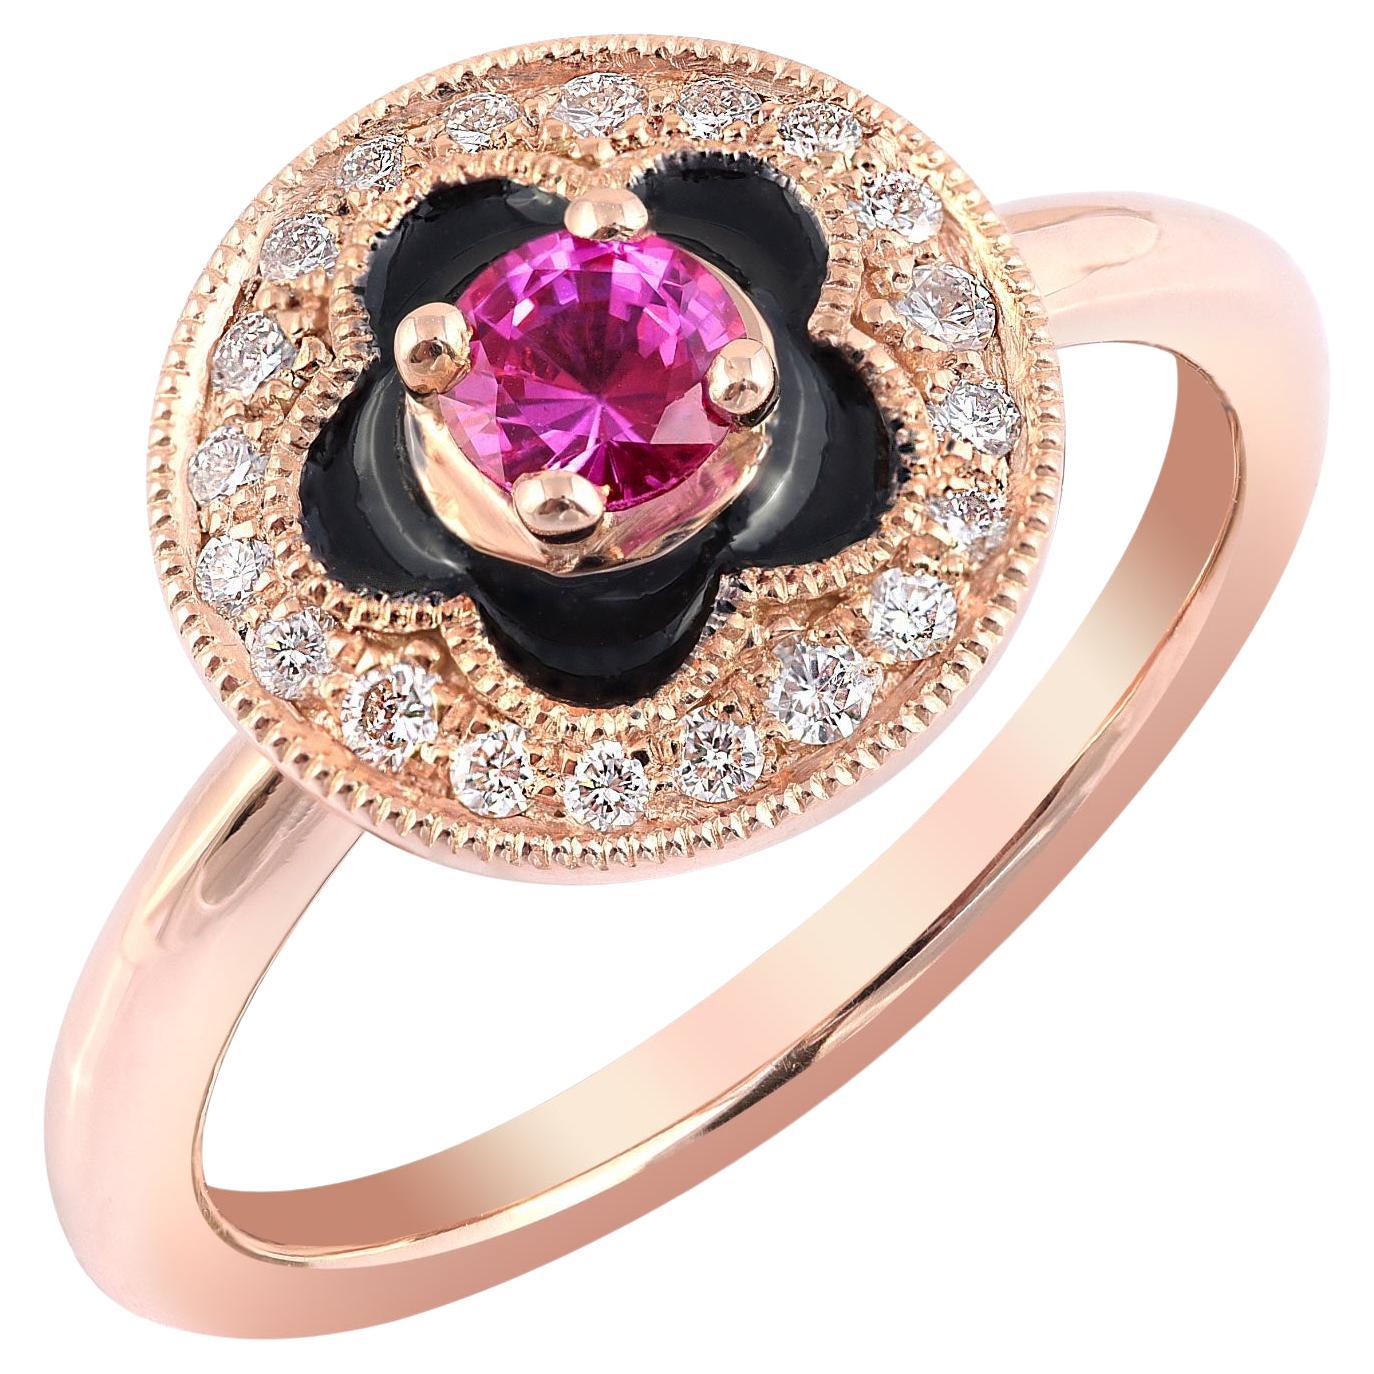  0.30 Carats Natural Pink Sapphires Diamonds set  in 14K Rose Gold Ring  For Sale